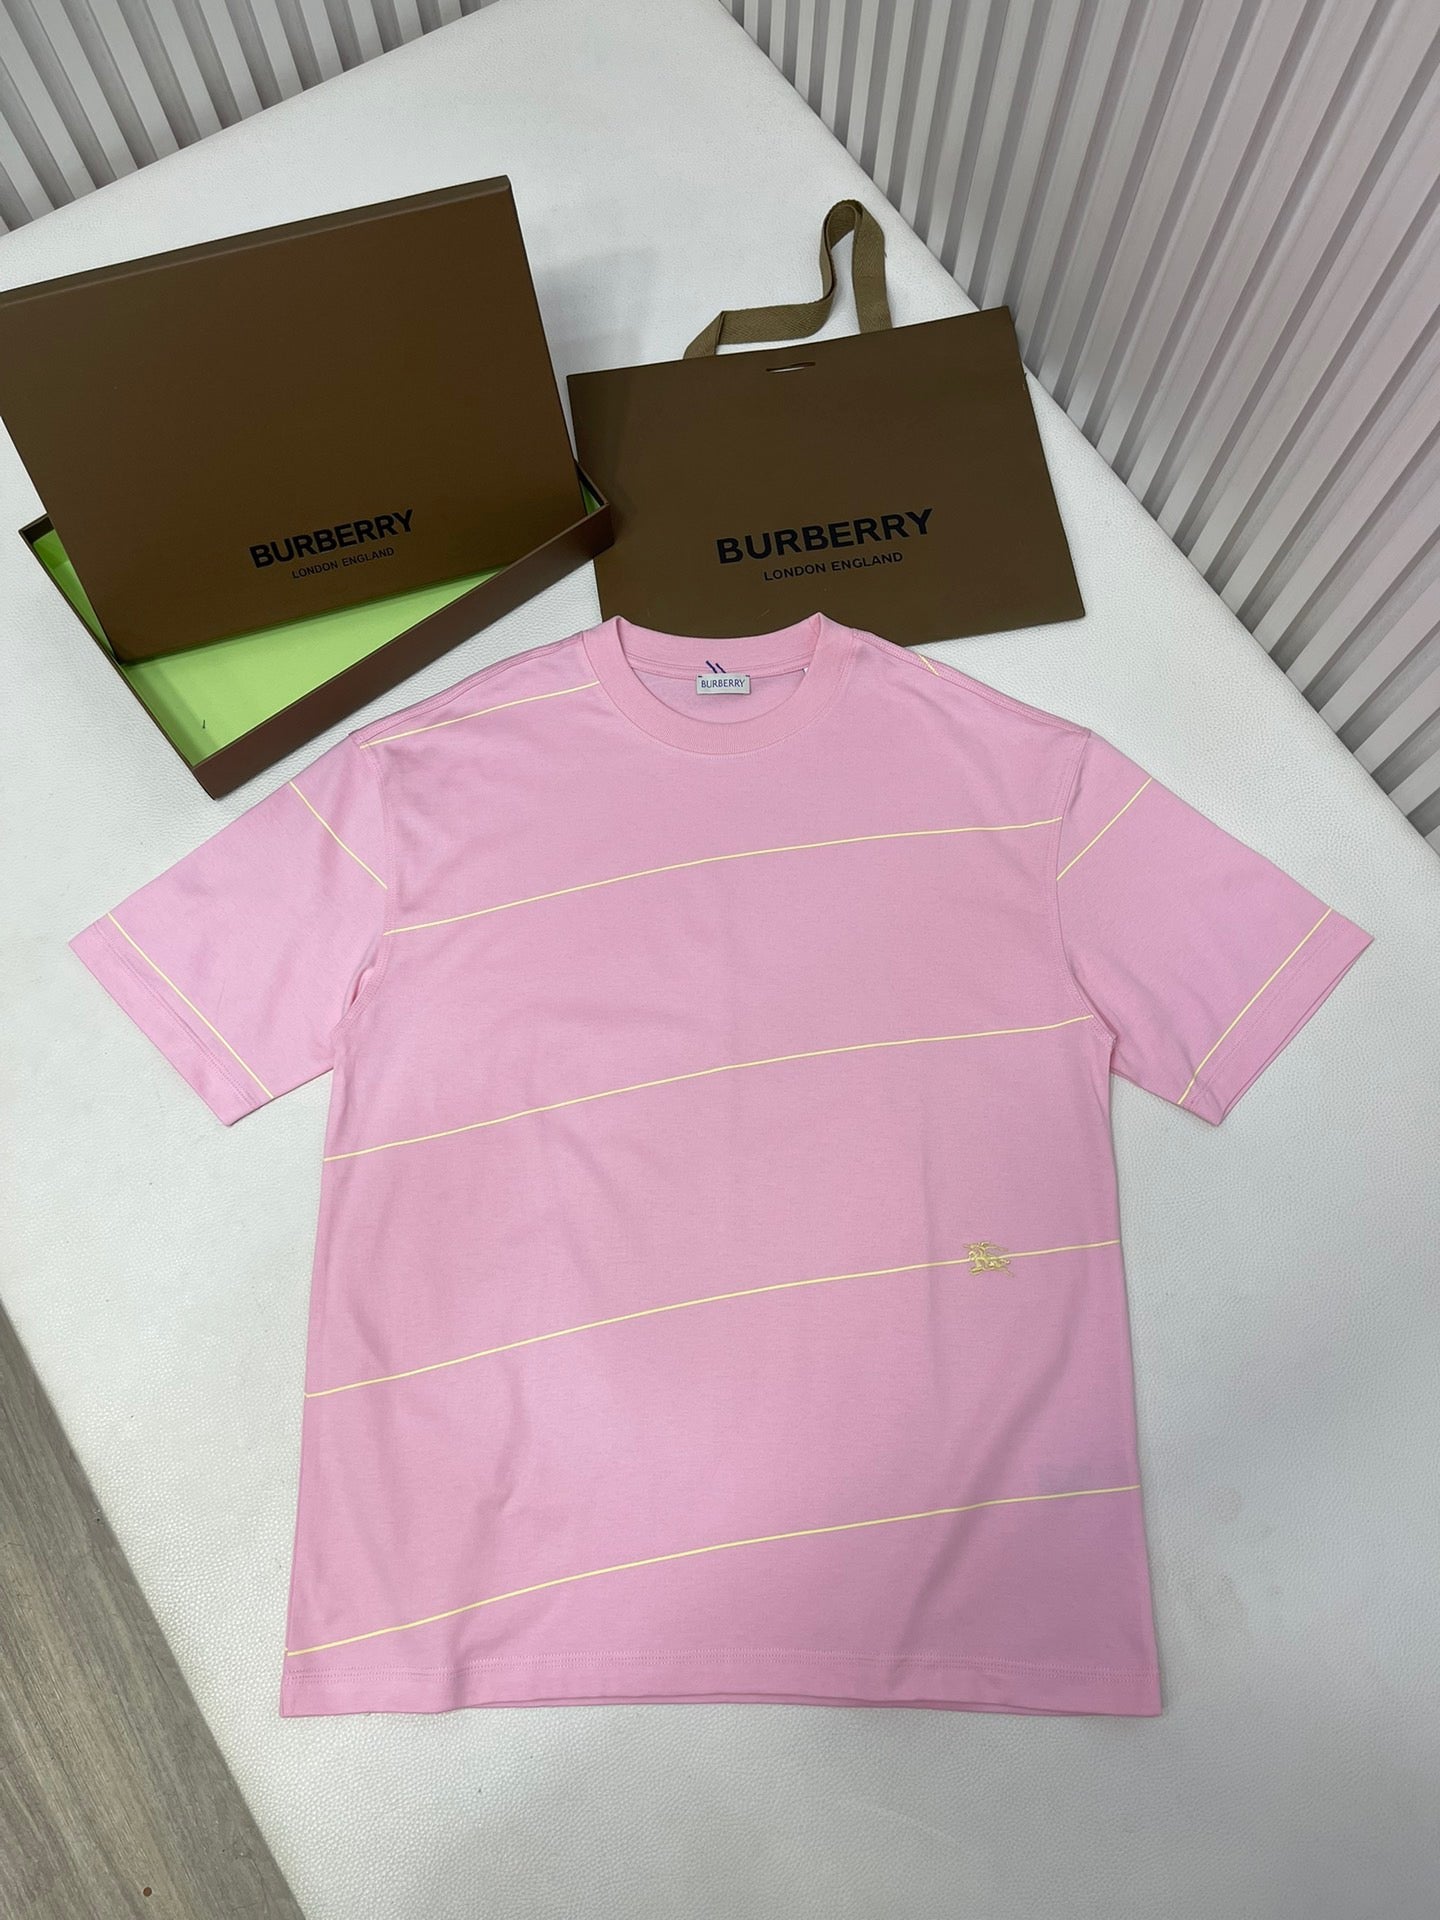 Black,White,Green and Pink T-shirt